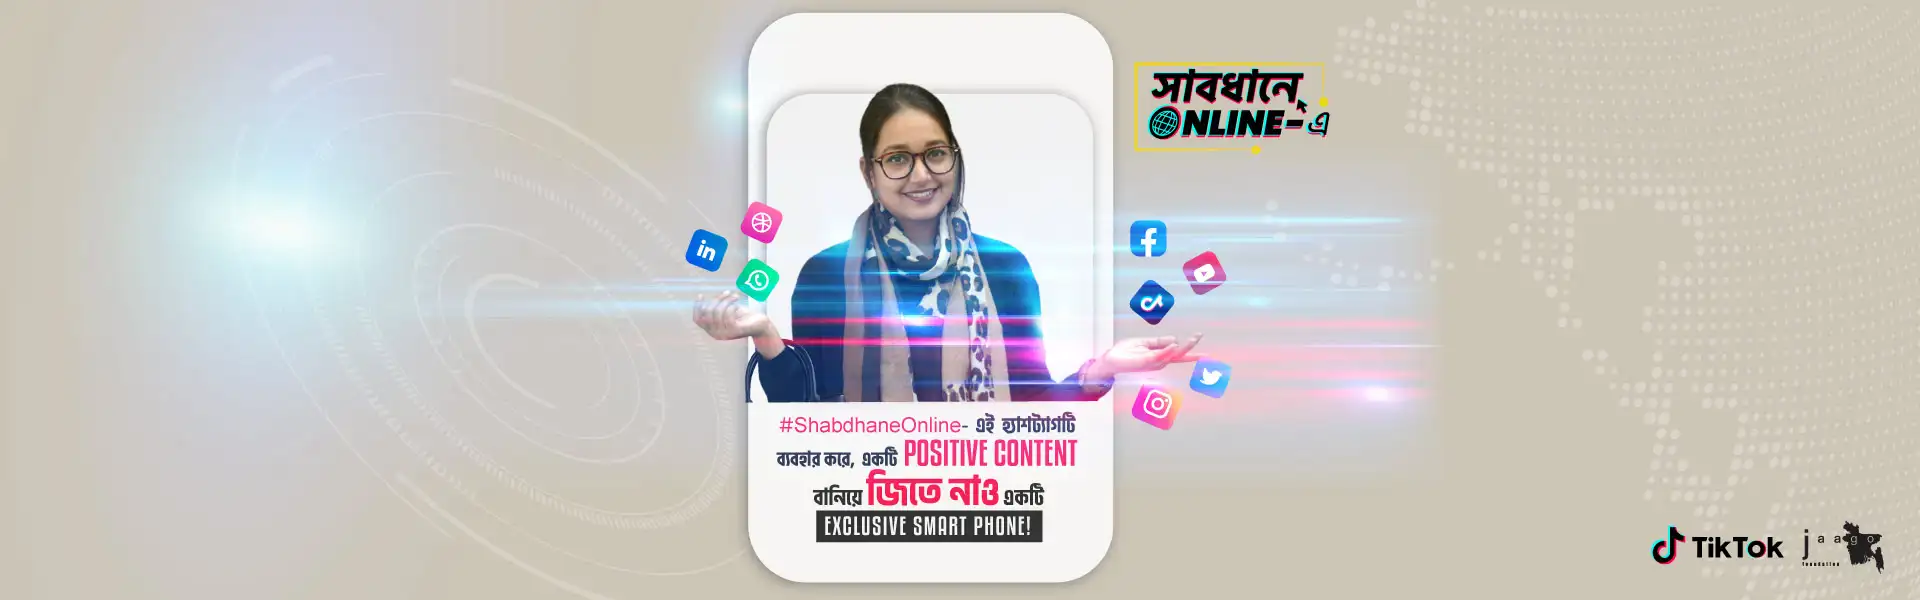 Shabdhane Online e Positive Content Project by JAAGO and TikTok